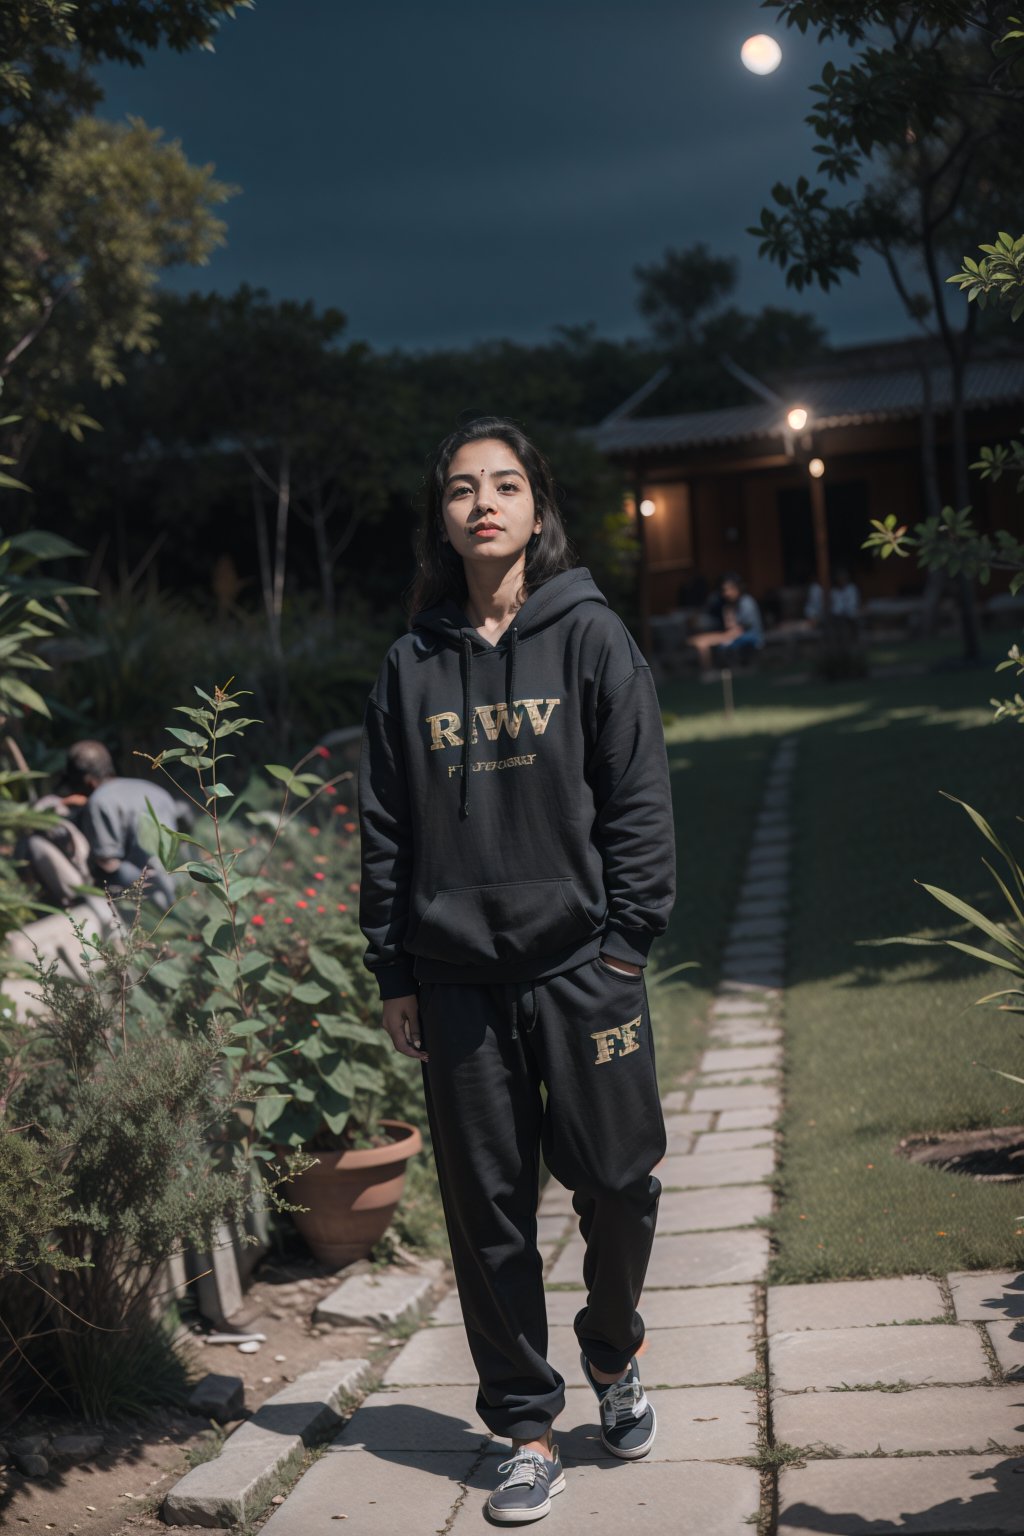 Fujifilms, Raw photo, sony a7iii SLR photoshoot, ultra realistic, natural face and body structure, full body shot, she is a beautiful 21 year old indian women, clear forehead, shot from a distance, india background, looking aesthetic, she is in garden, night time,  she is wearing a loose and baggy trouser, wearing baggy hoodie,  there are many families in the garden, hot sila,18 year old girl